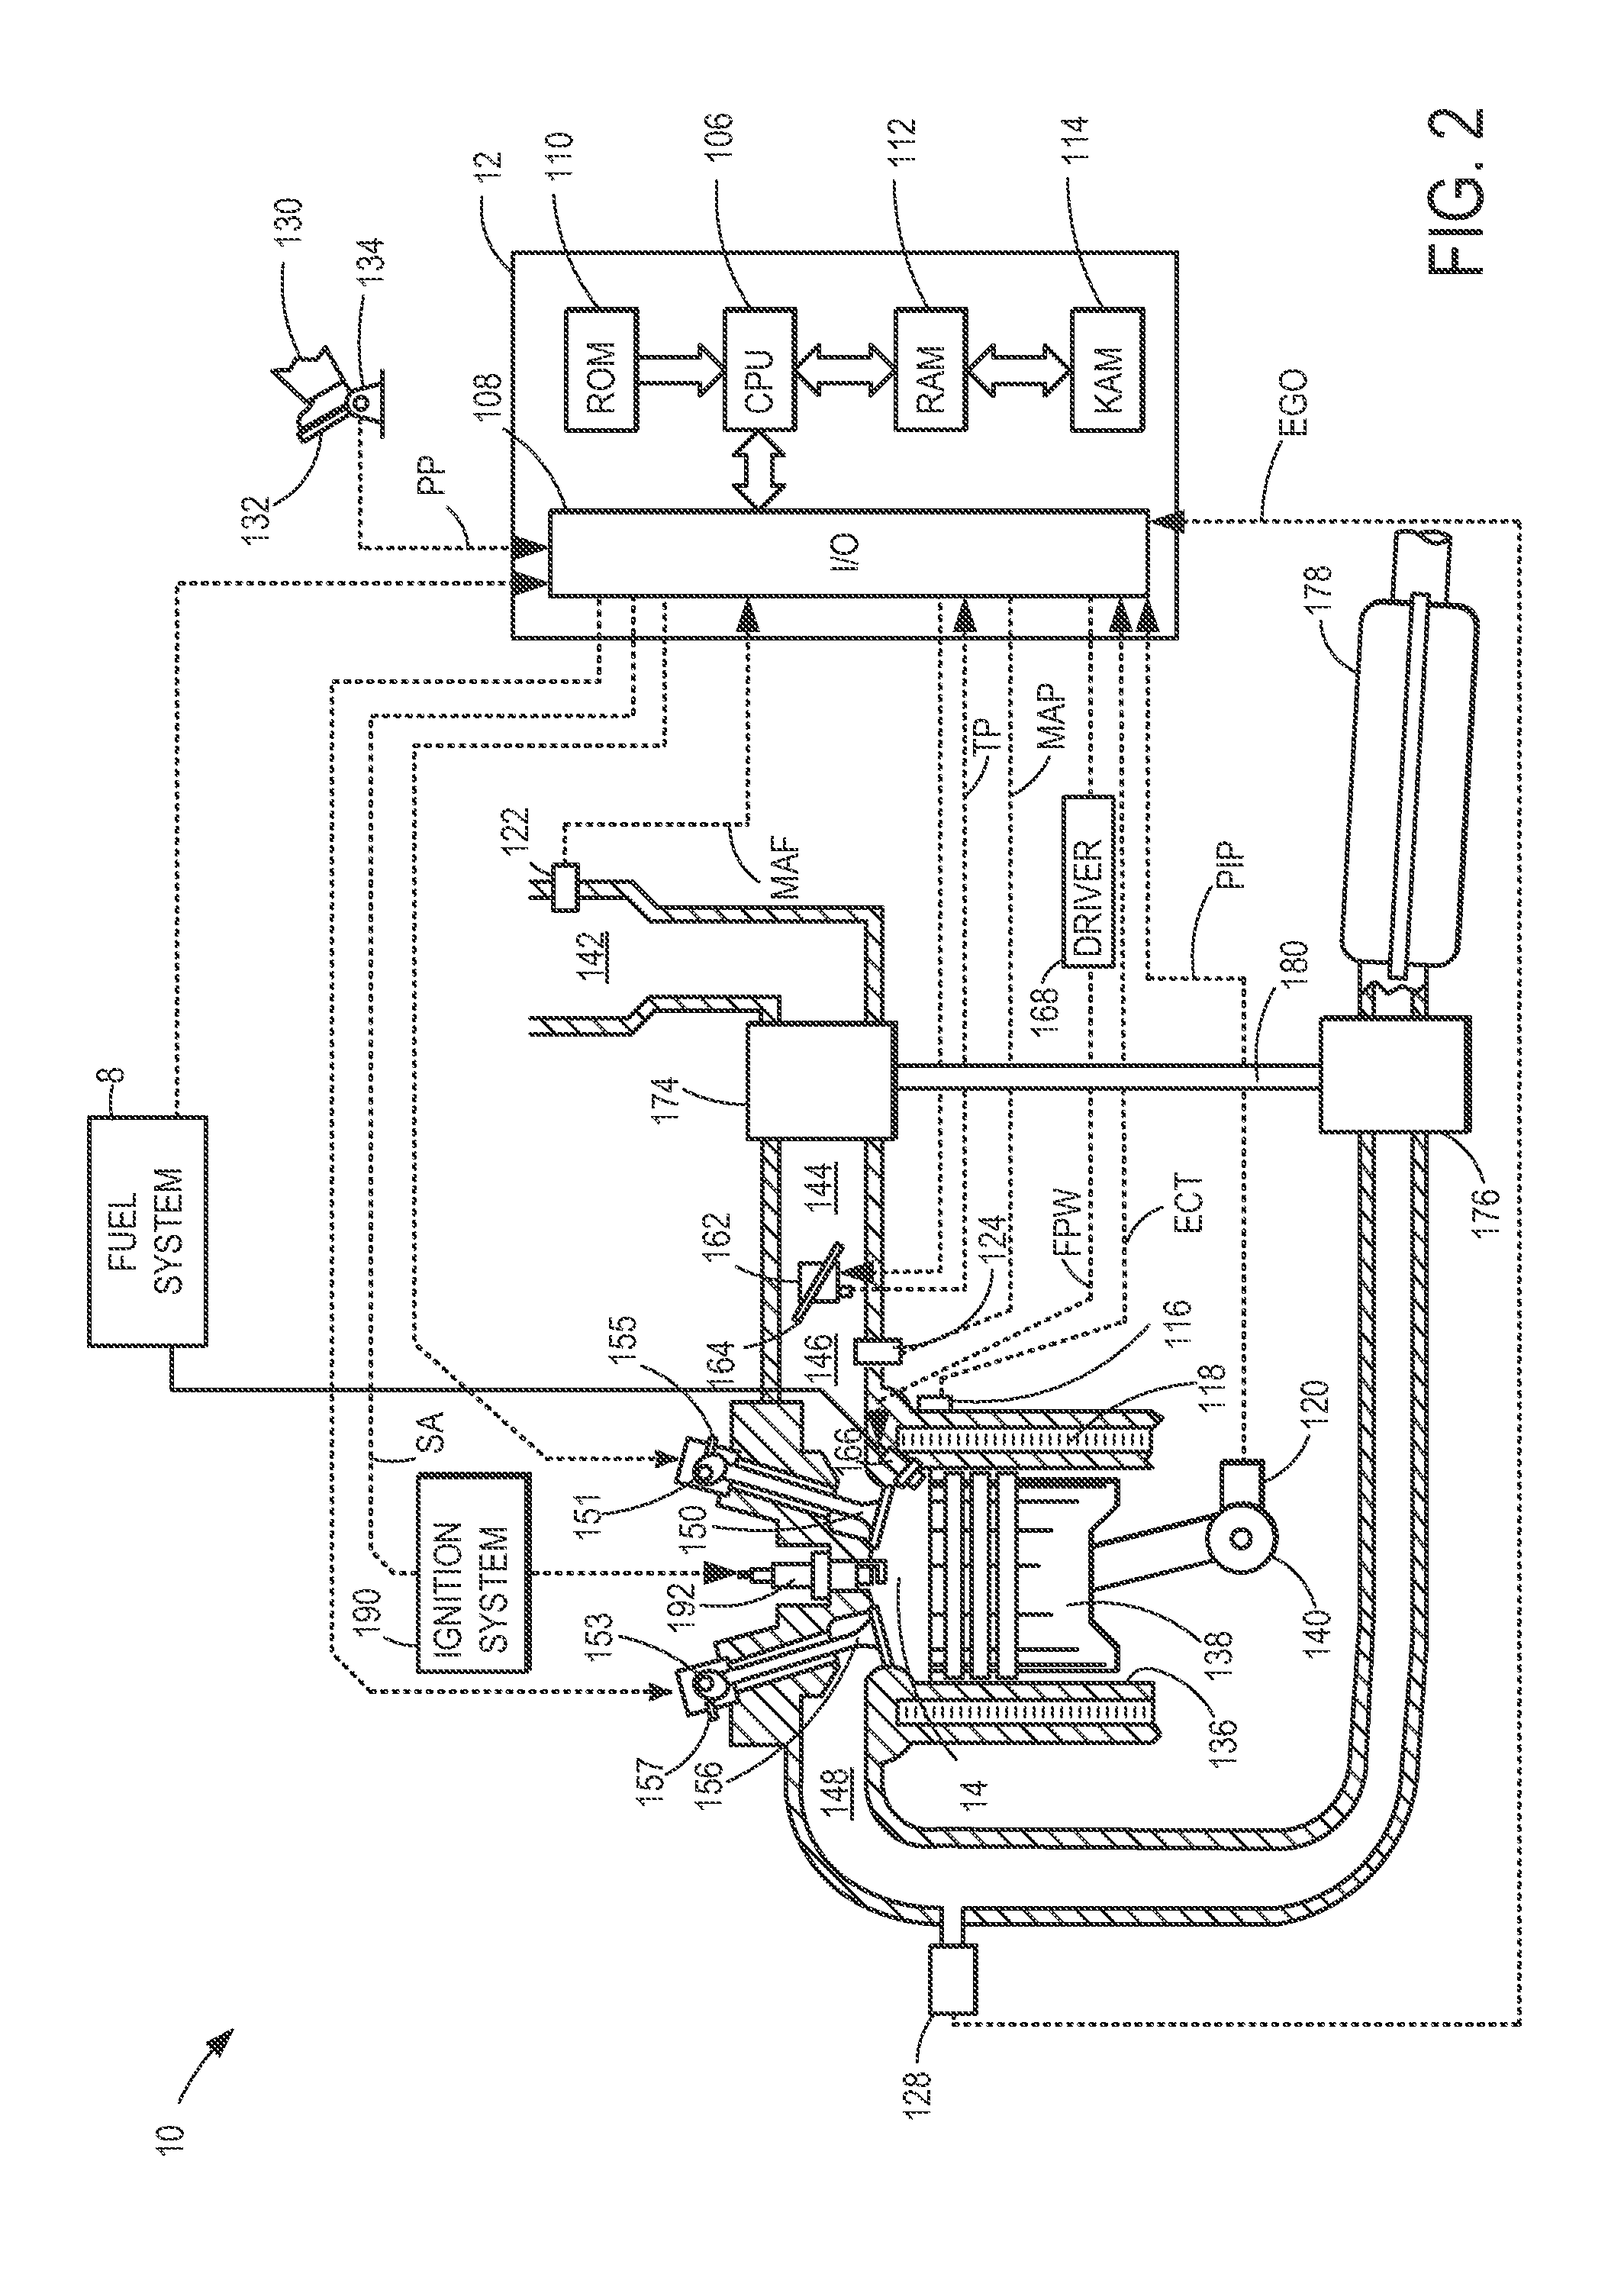 Methods and systems for engine control